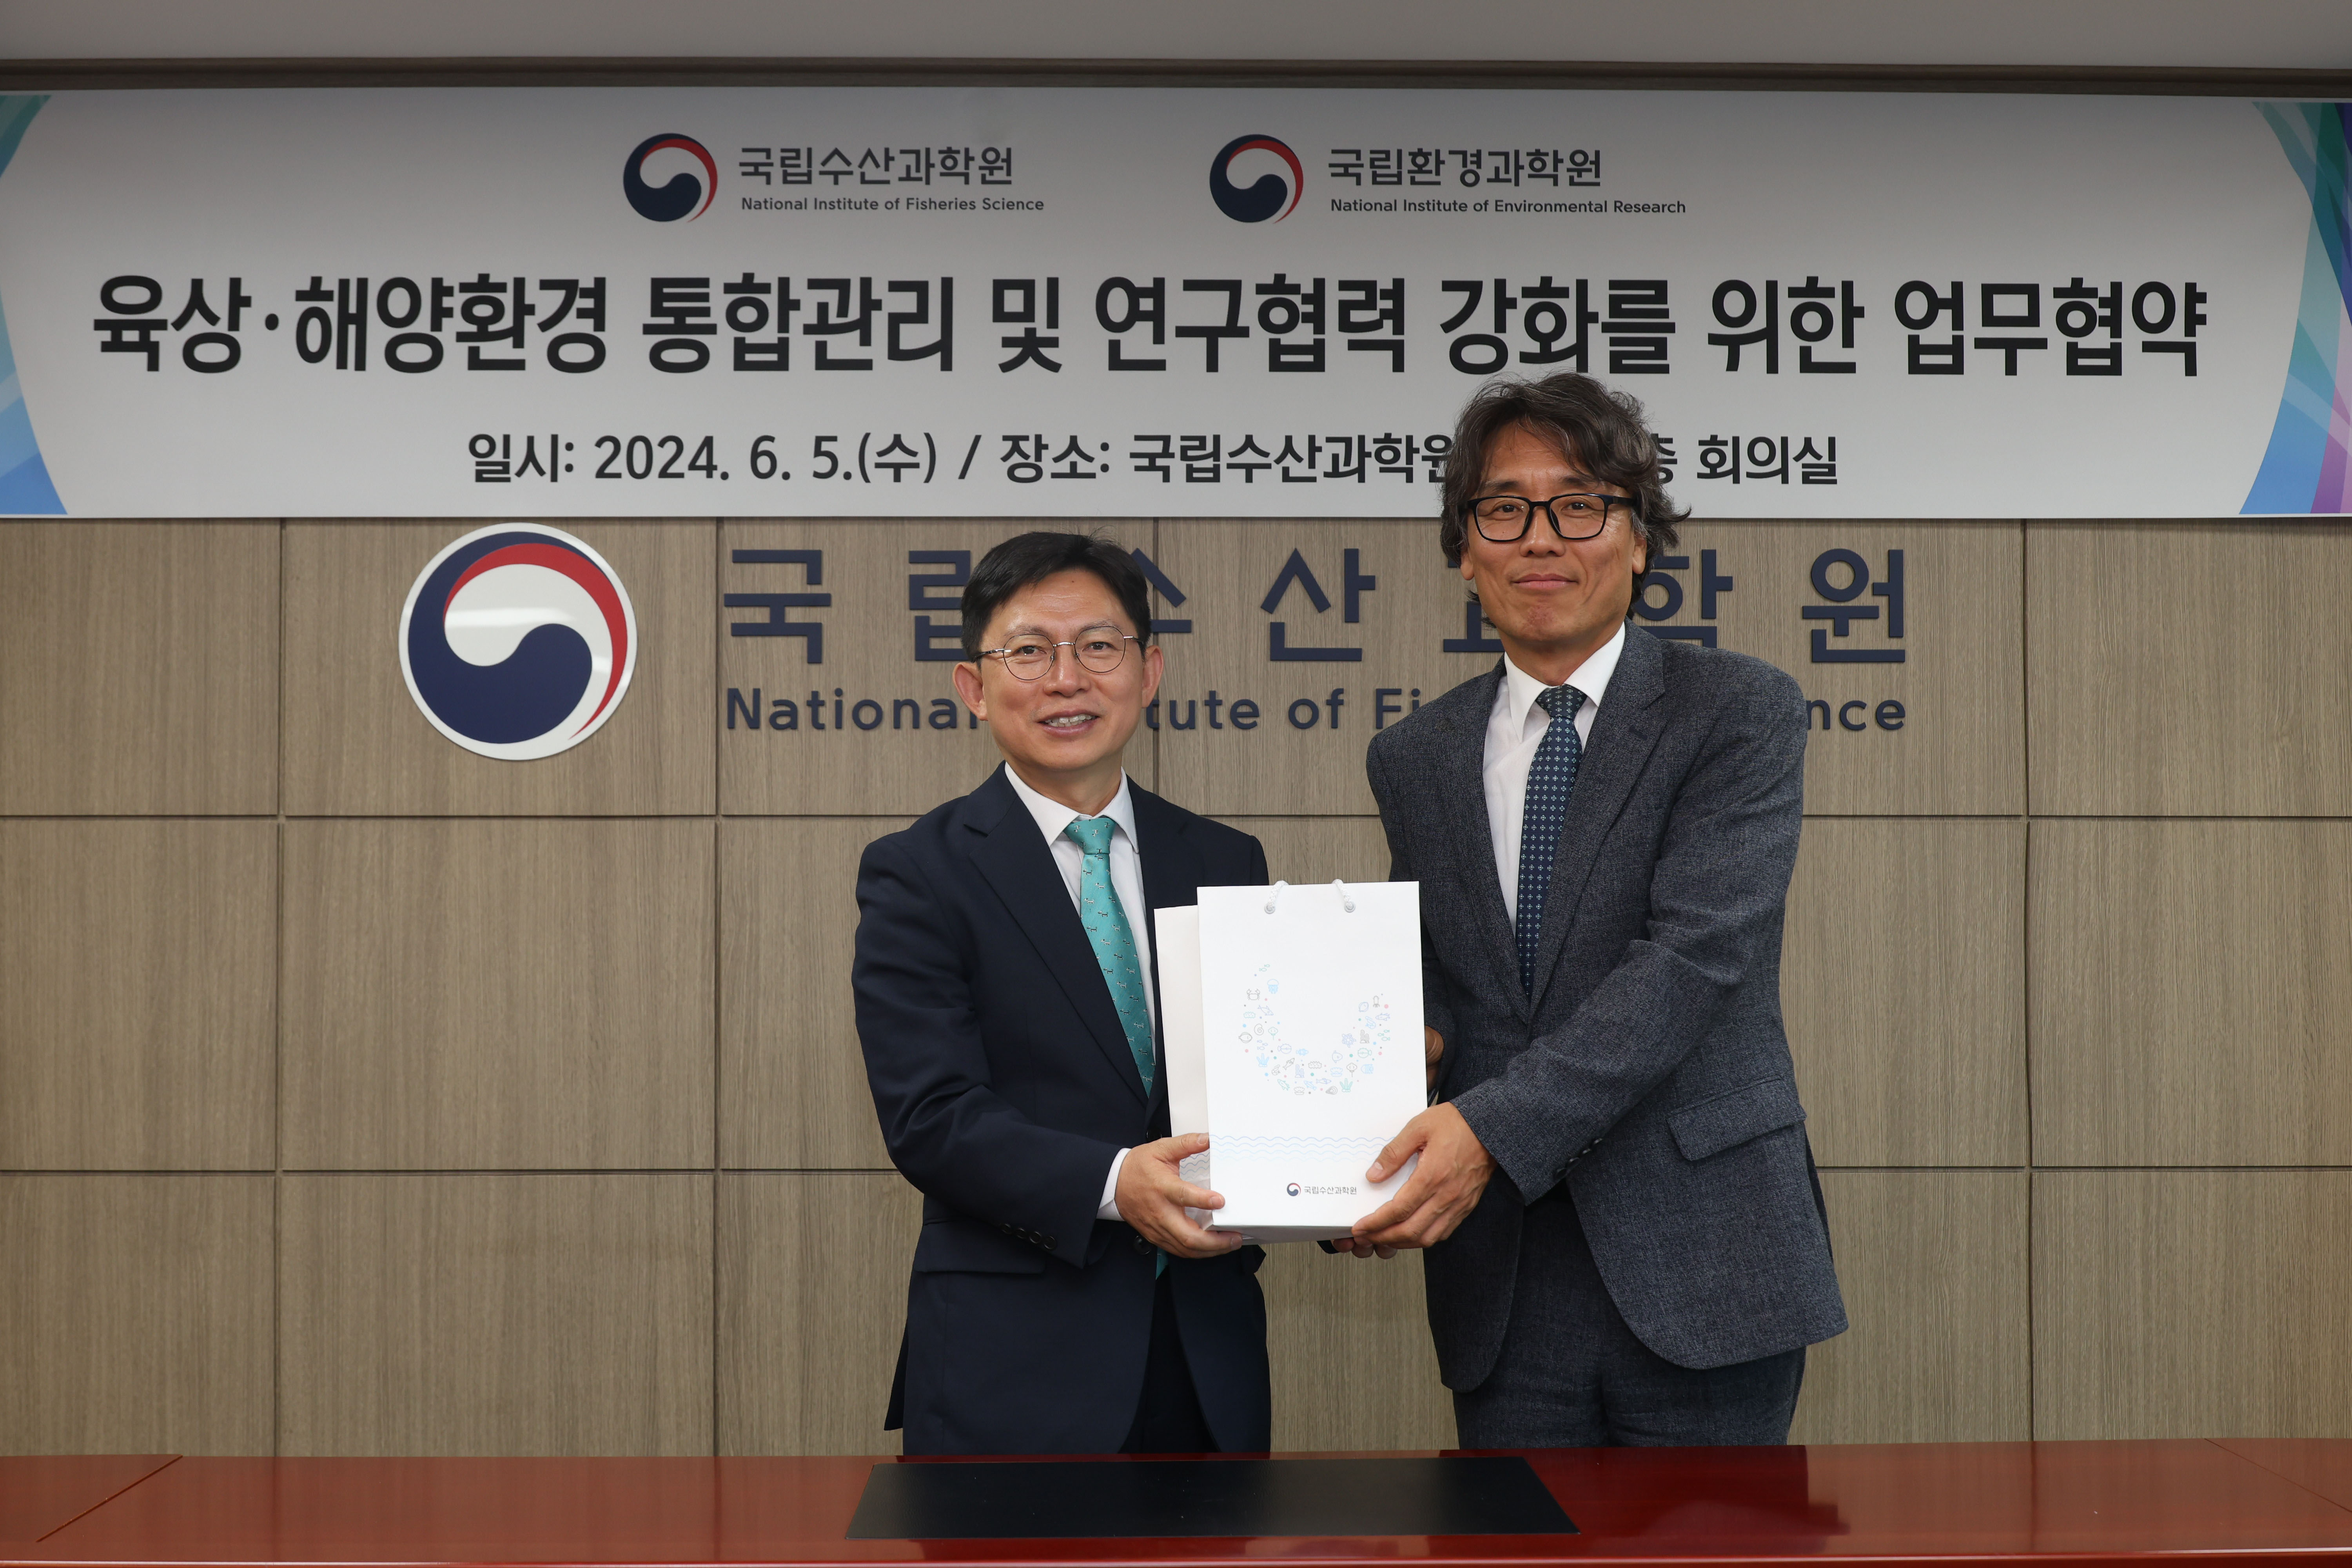 MOU Signing with NIFS and NIER 배경